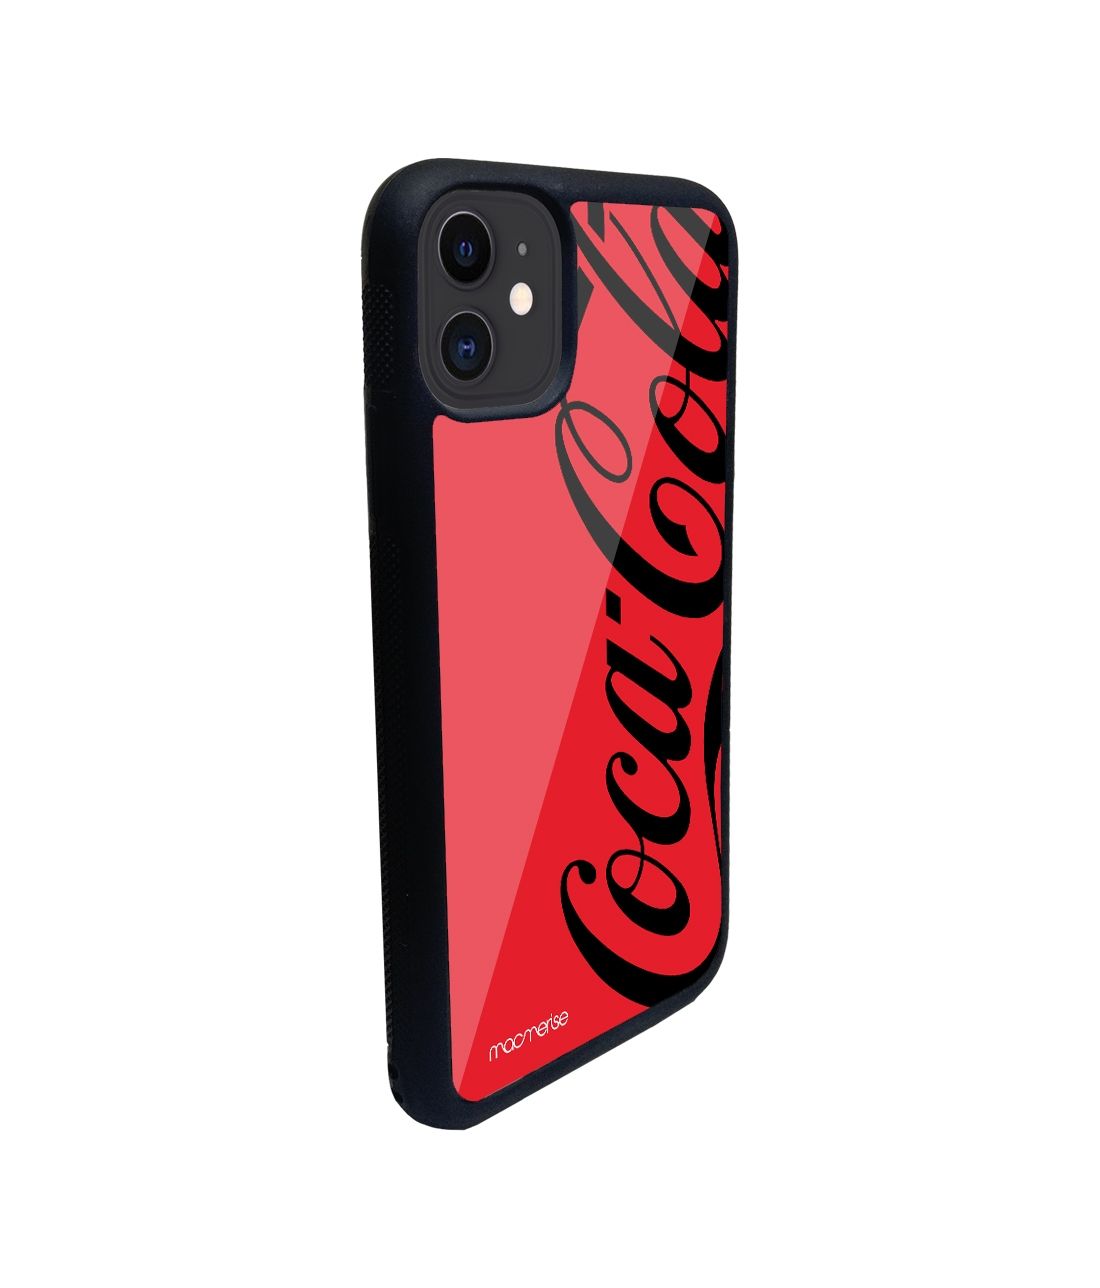 Buy Coke Red Black Macmerise Glass Case Cover For Iphone 11 Online